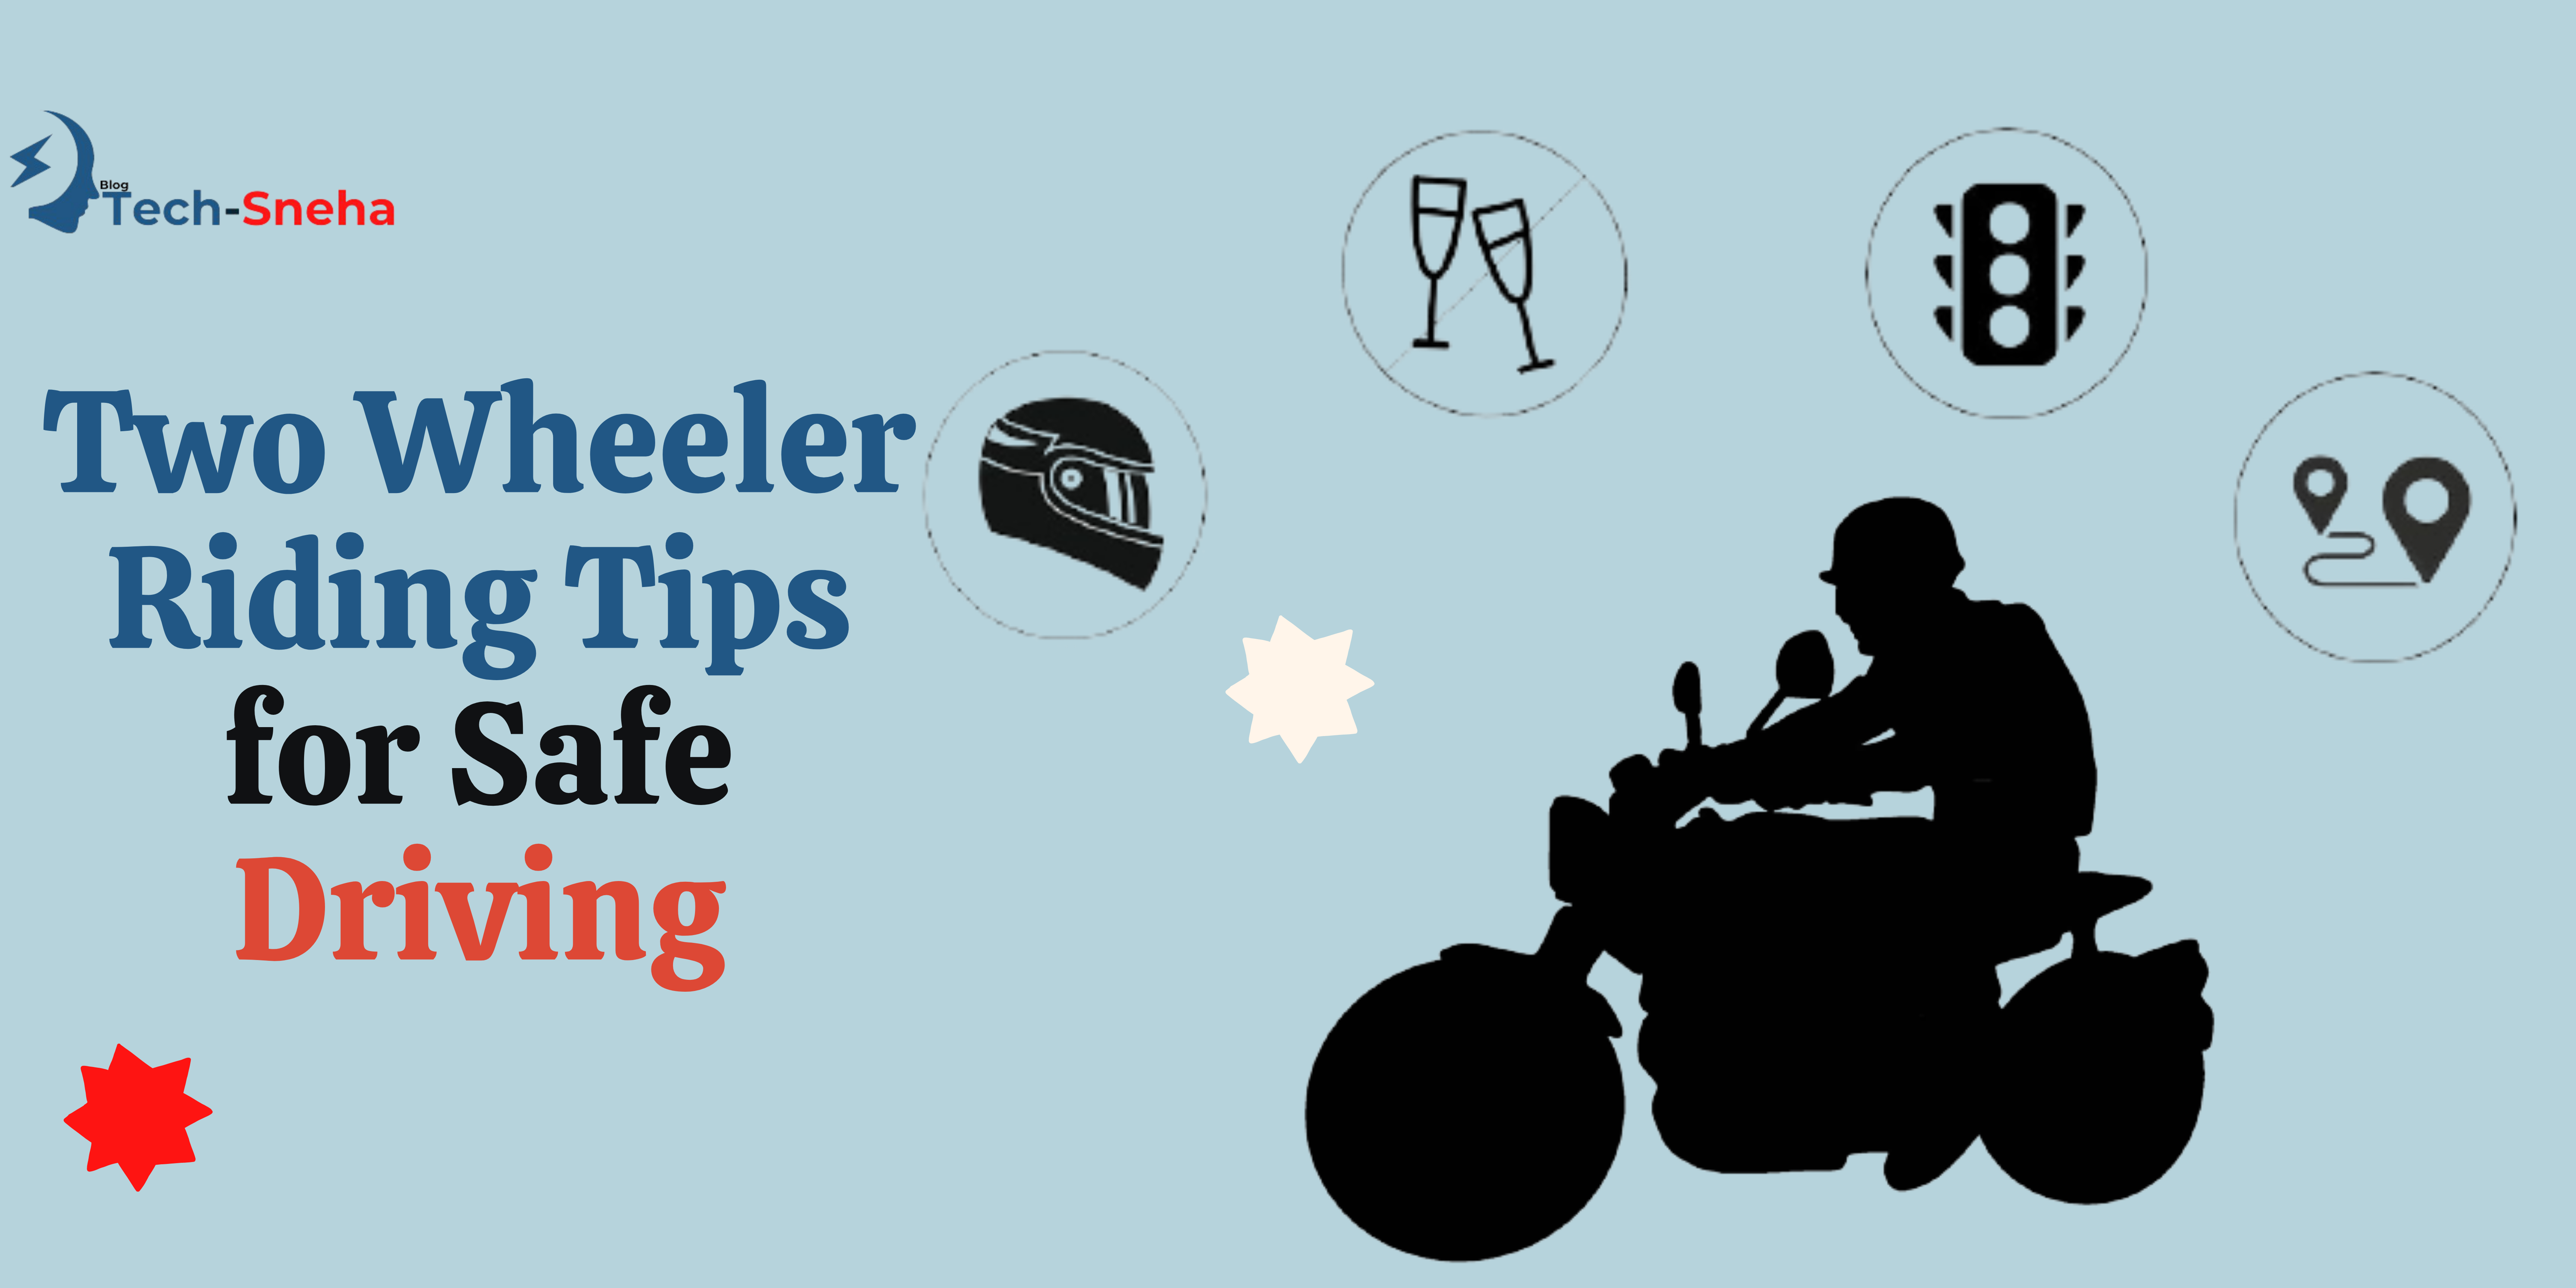 Two Wheeler Riding Tips for Safe Driving